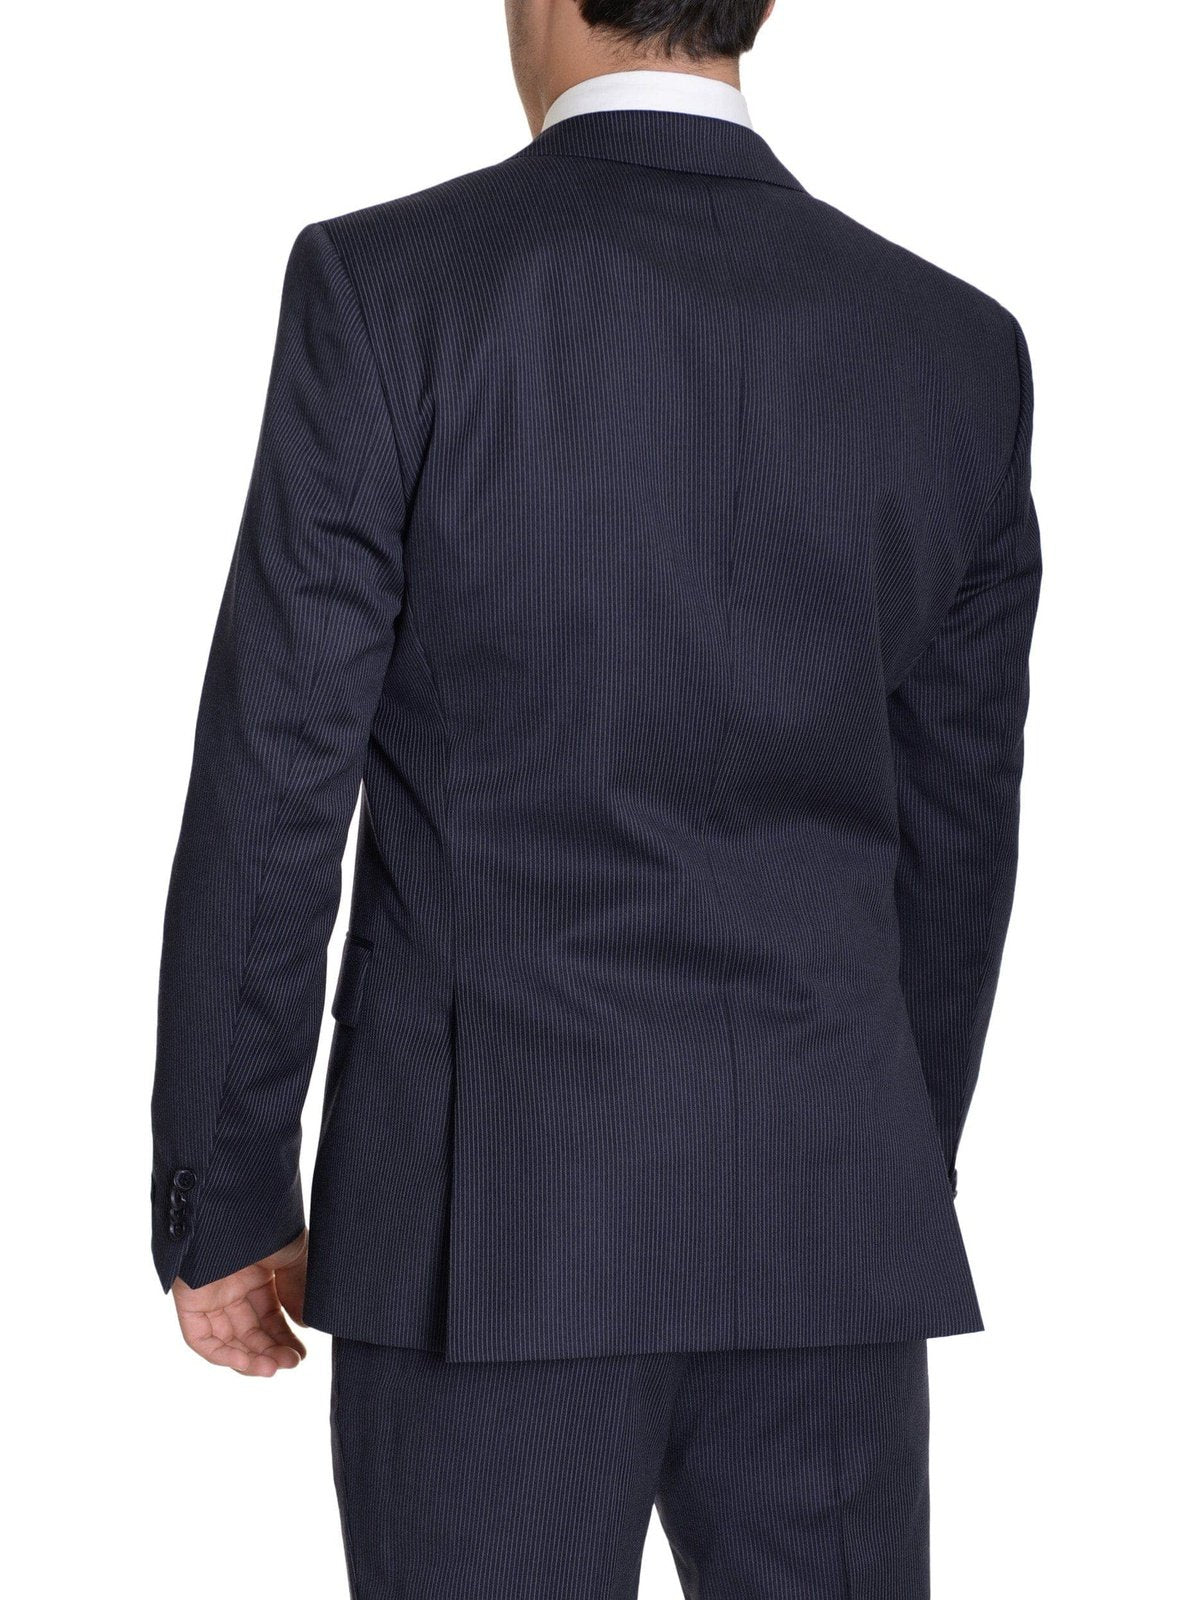 HUGO BOSS TWO PIECE SUITS Hugo Boss The Grand/central Classic Fit Navy Pinstriped Two Button Wool Suit